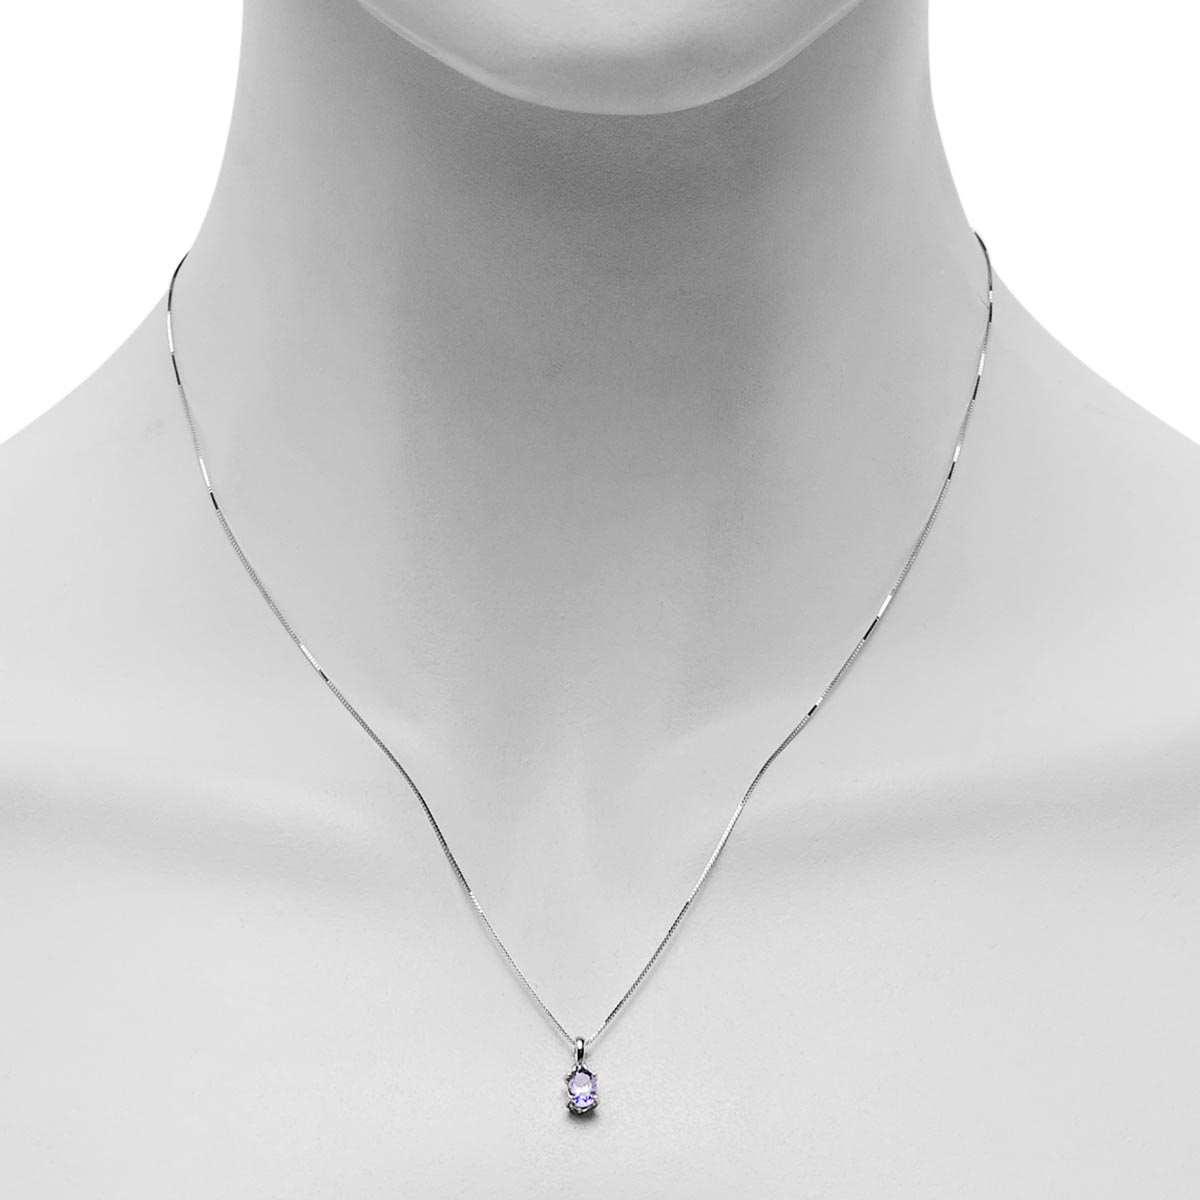 Oval Tanzanite Necklace in 14kt White Gold